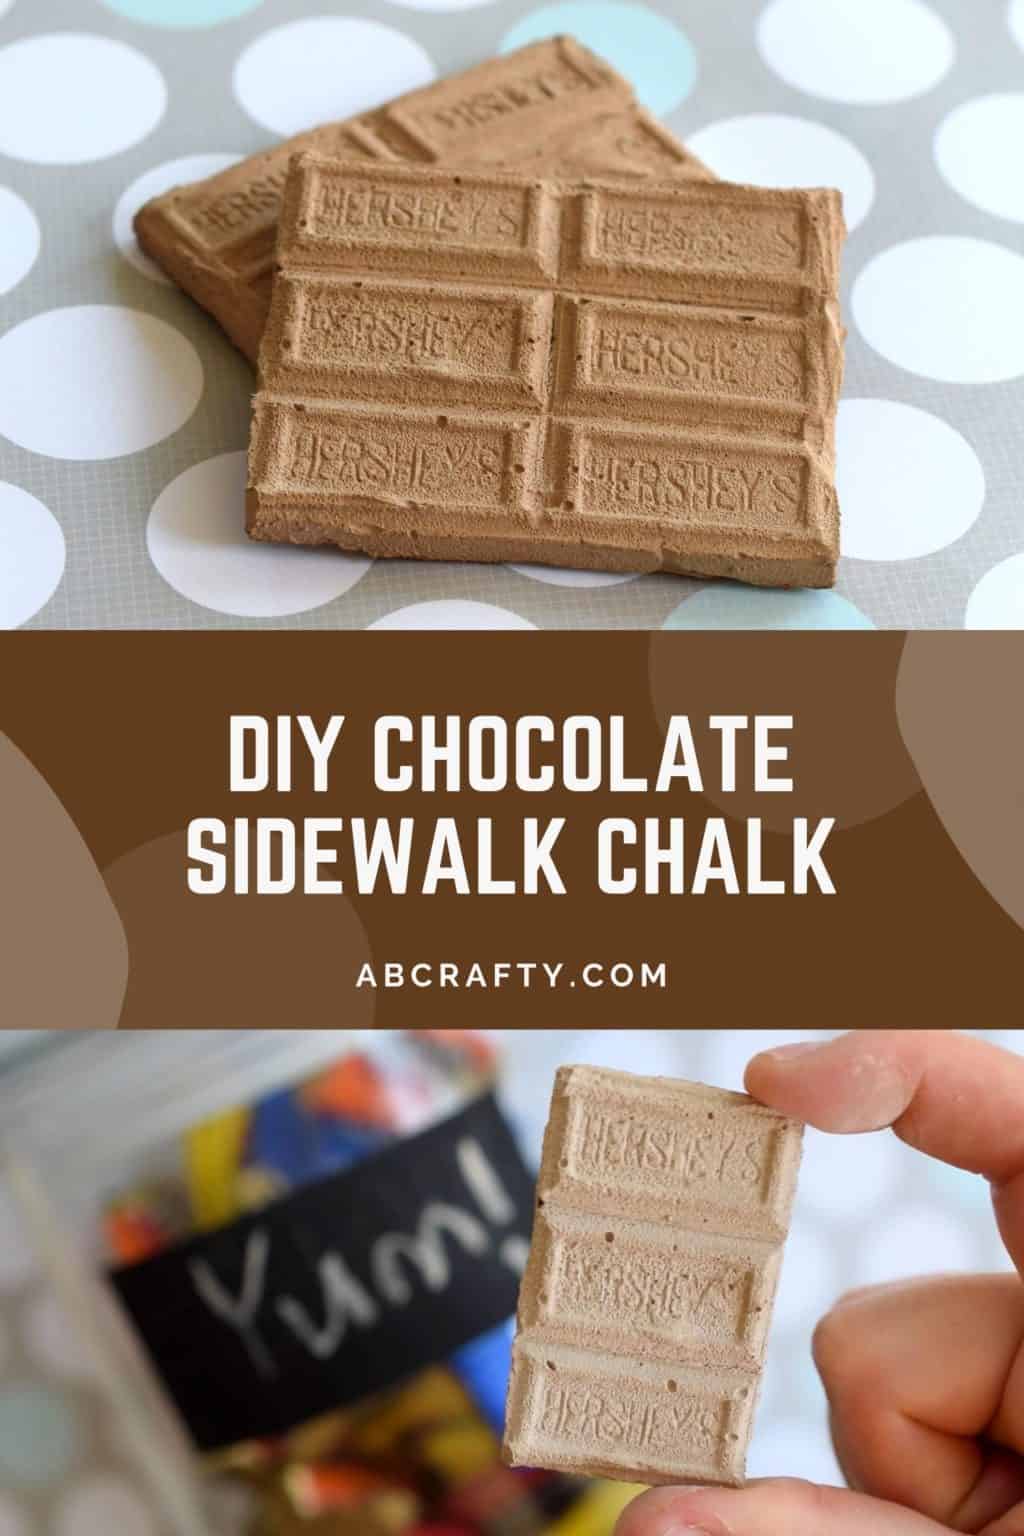 top image is of two chocolate bars made of sidewalk chalk stacked on top of each other. the bottom image is a hand holding a small piece of chocolate chalk with hershey's imprinted on it with a jar in the background that says 'yum' written in on a chalkboard label. The title reads 'diy chocolate sidewalk chalk, abcrafty.com'